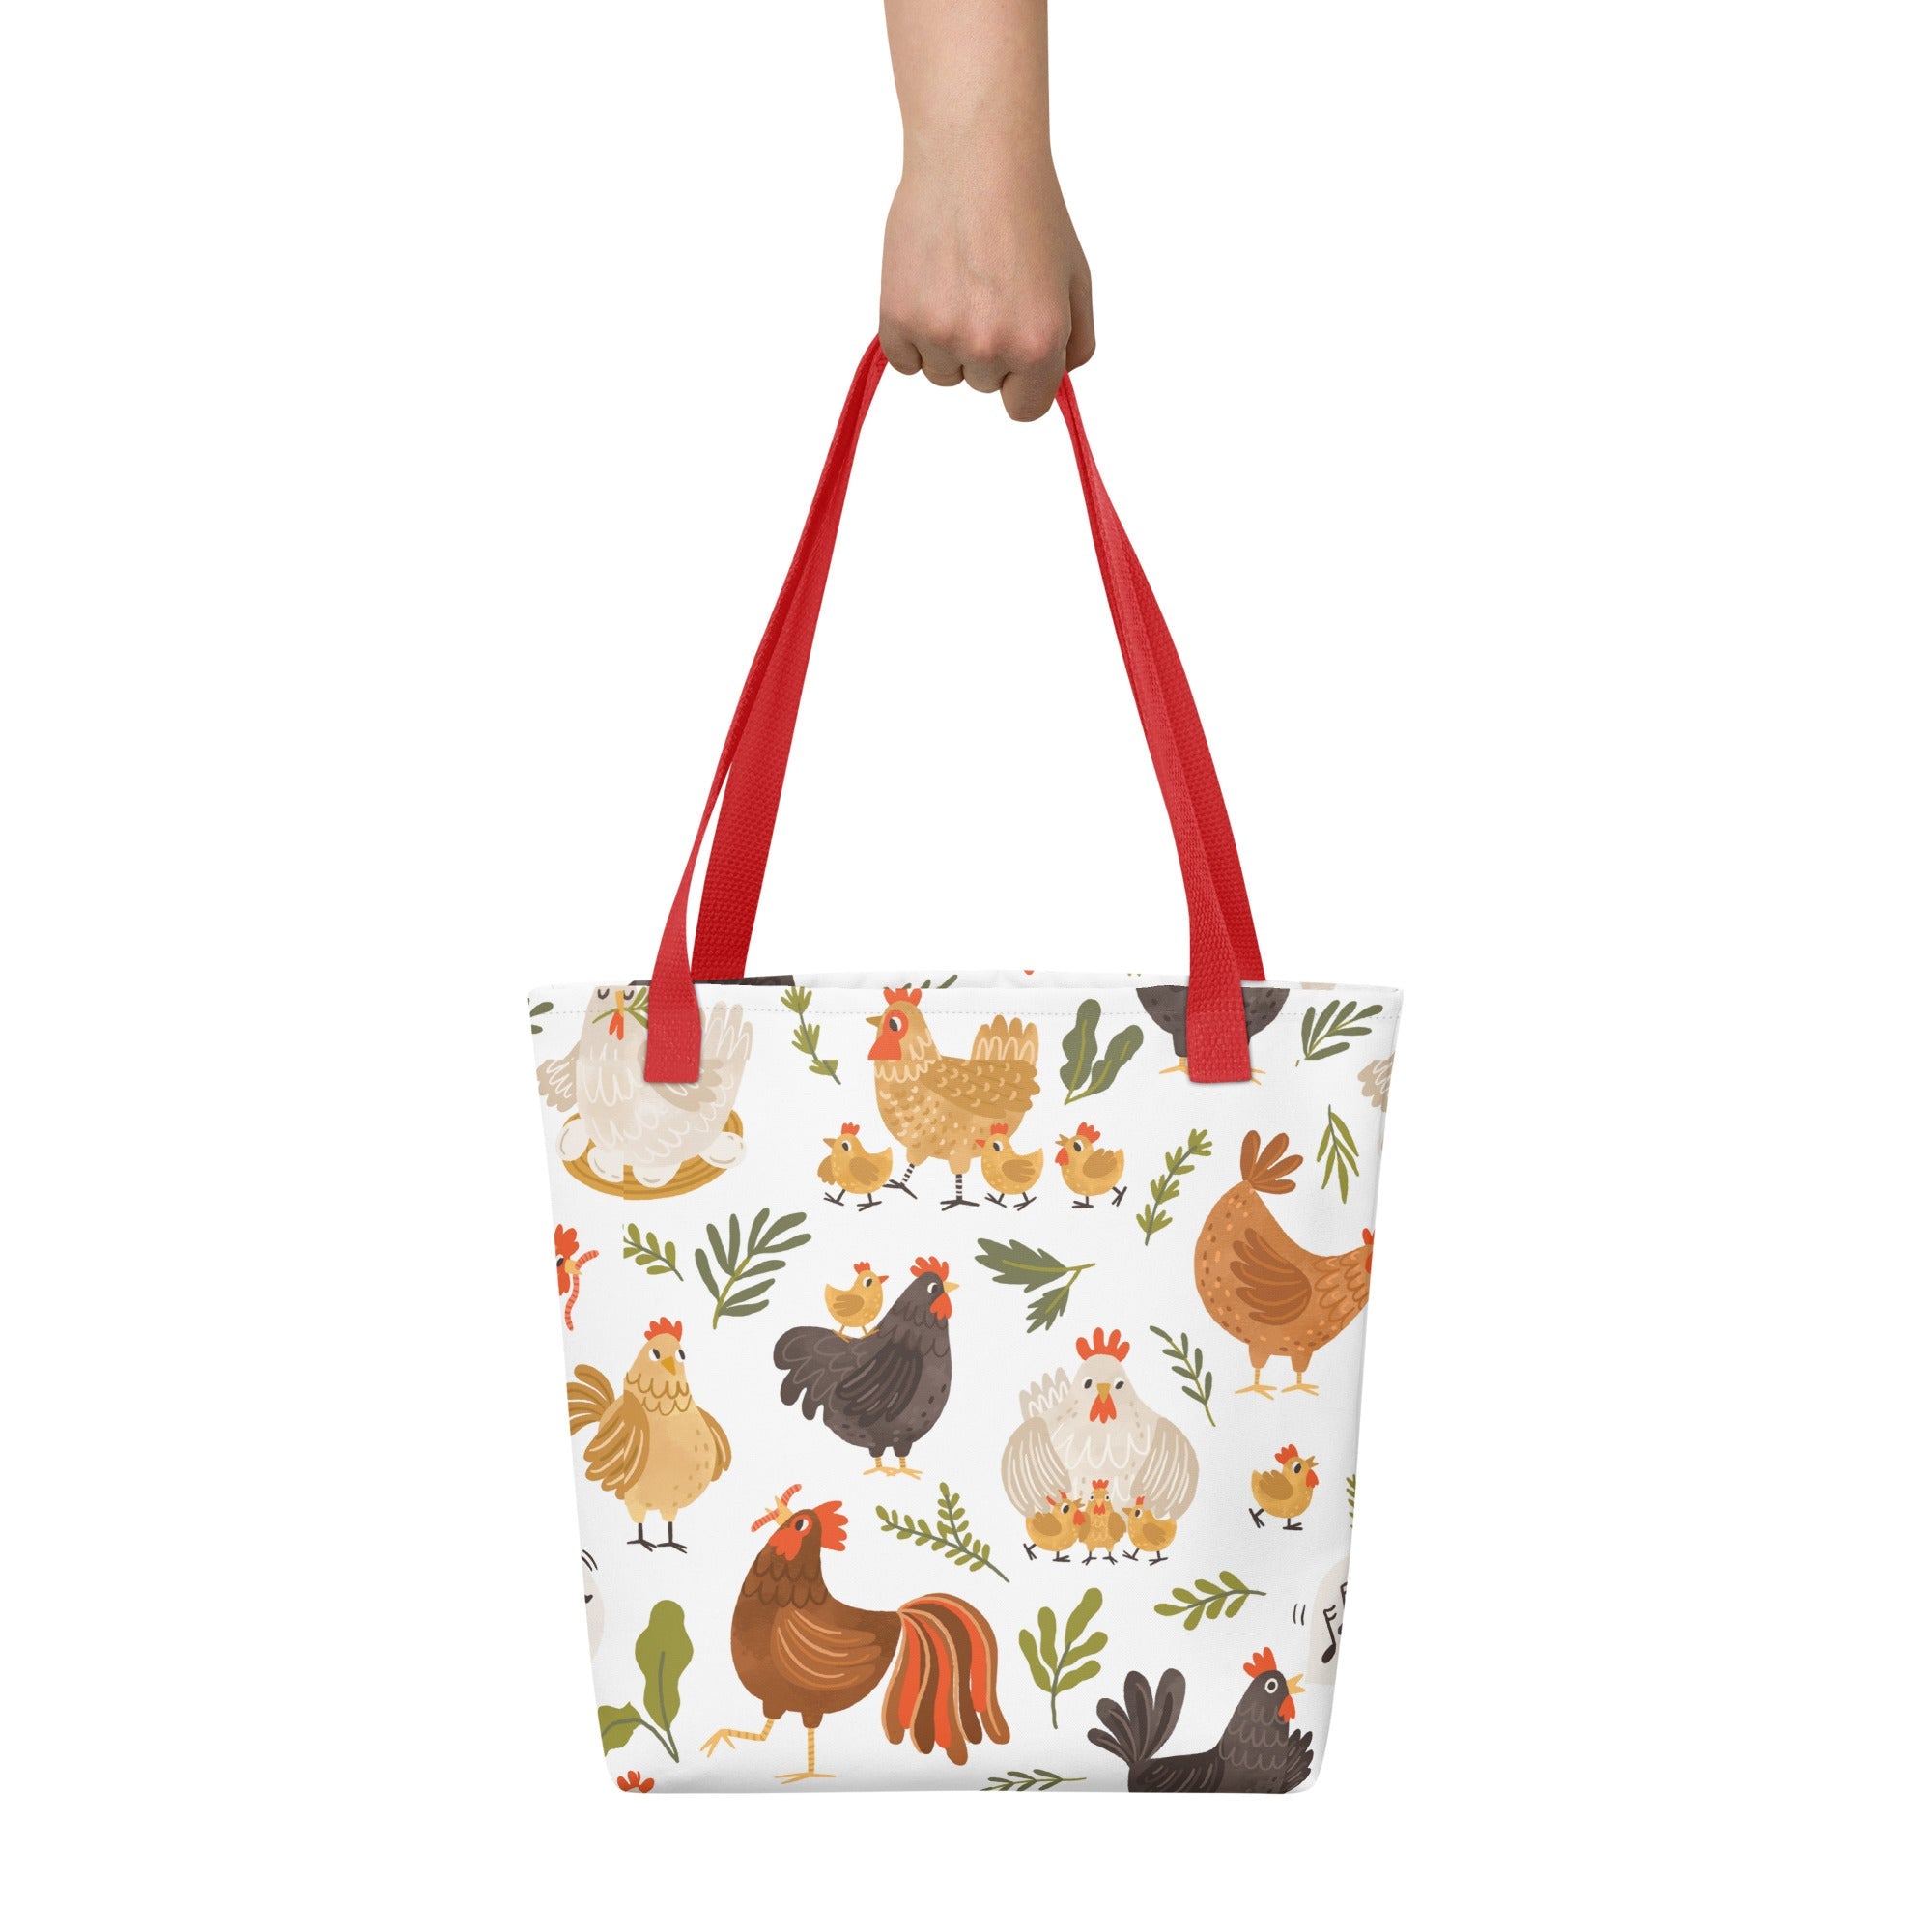 Whimsical Chicken Tote Bag - Cluck It All Farms